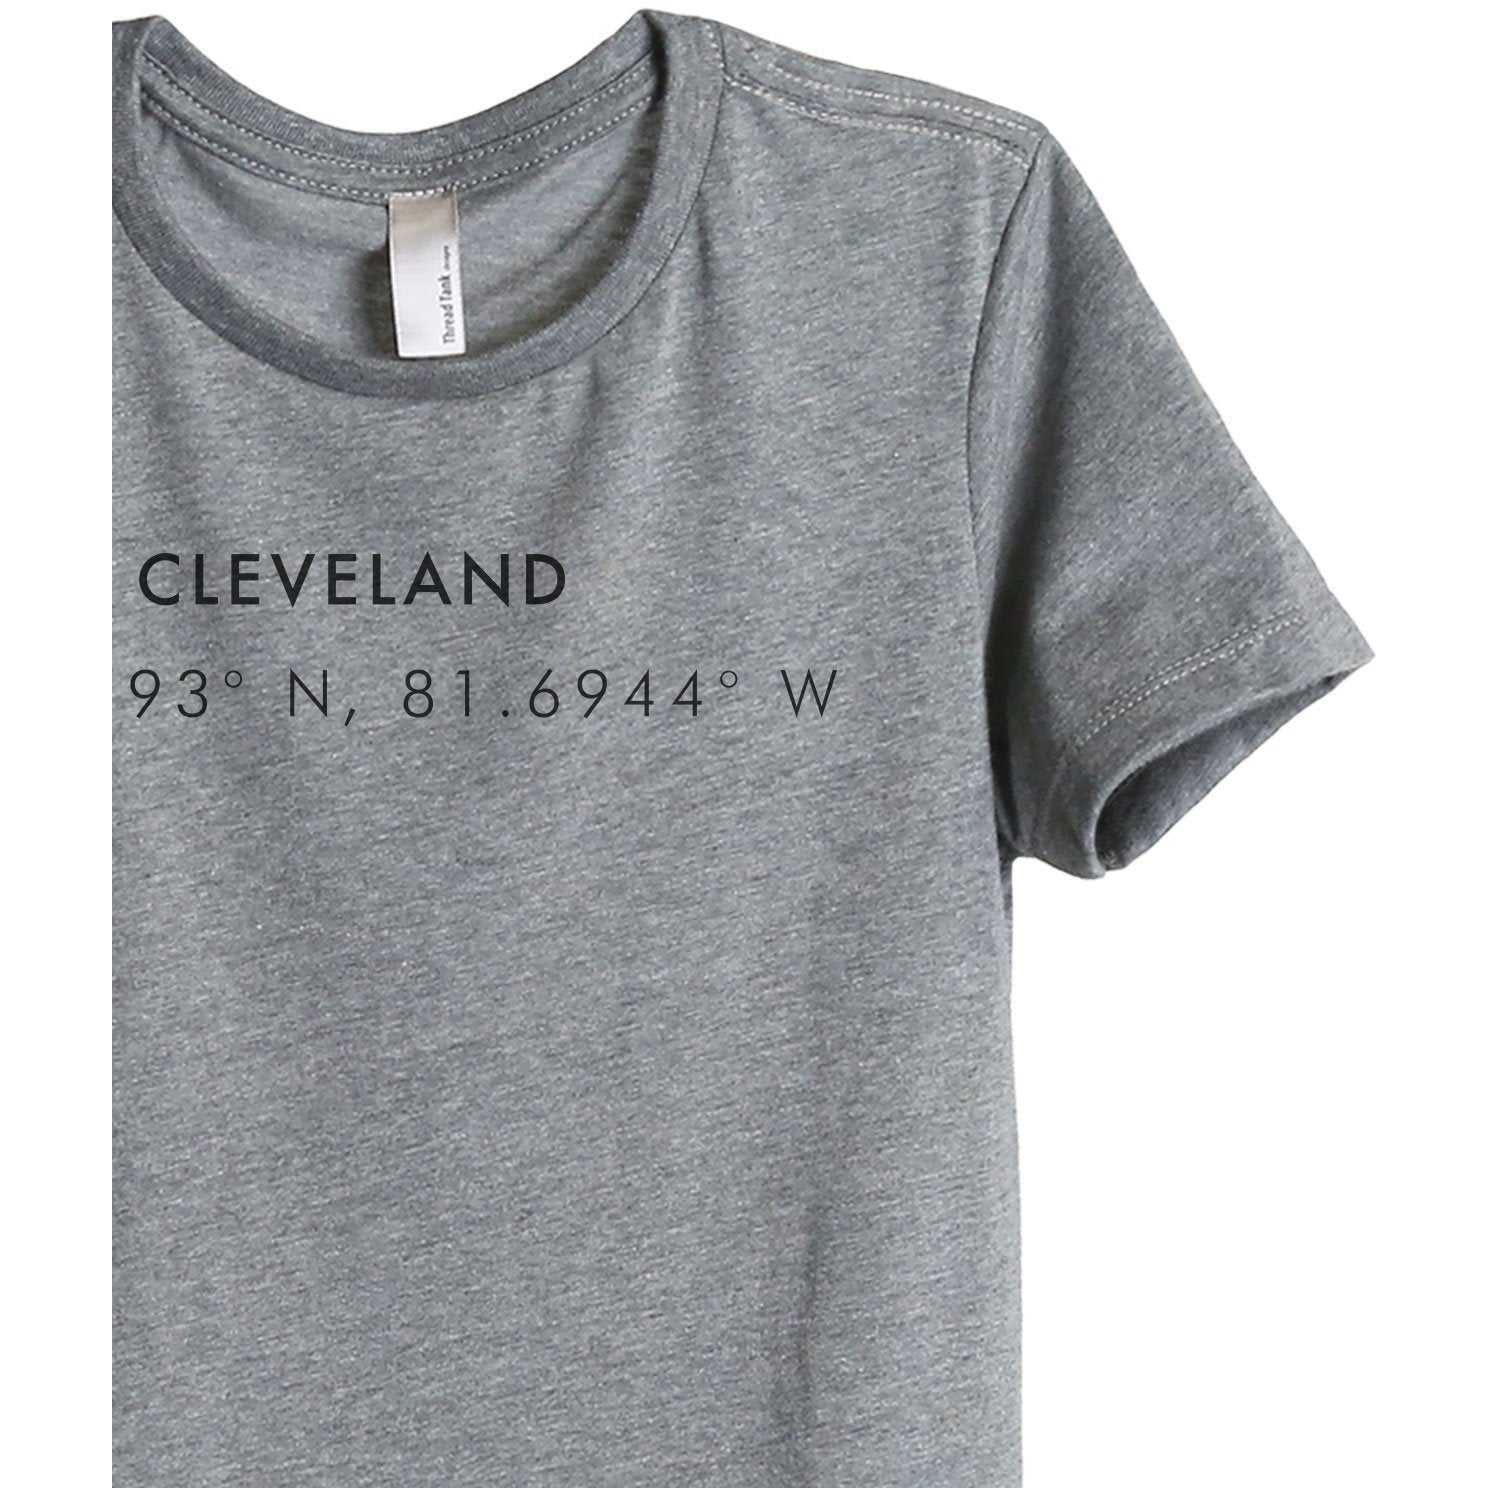 Cleveland Ohio Coordinates Women's Relaxed Crewneck T-Shirt Top Tee Heather Grey Zoom Details
